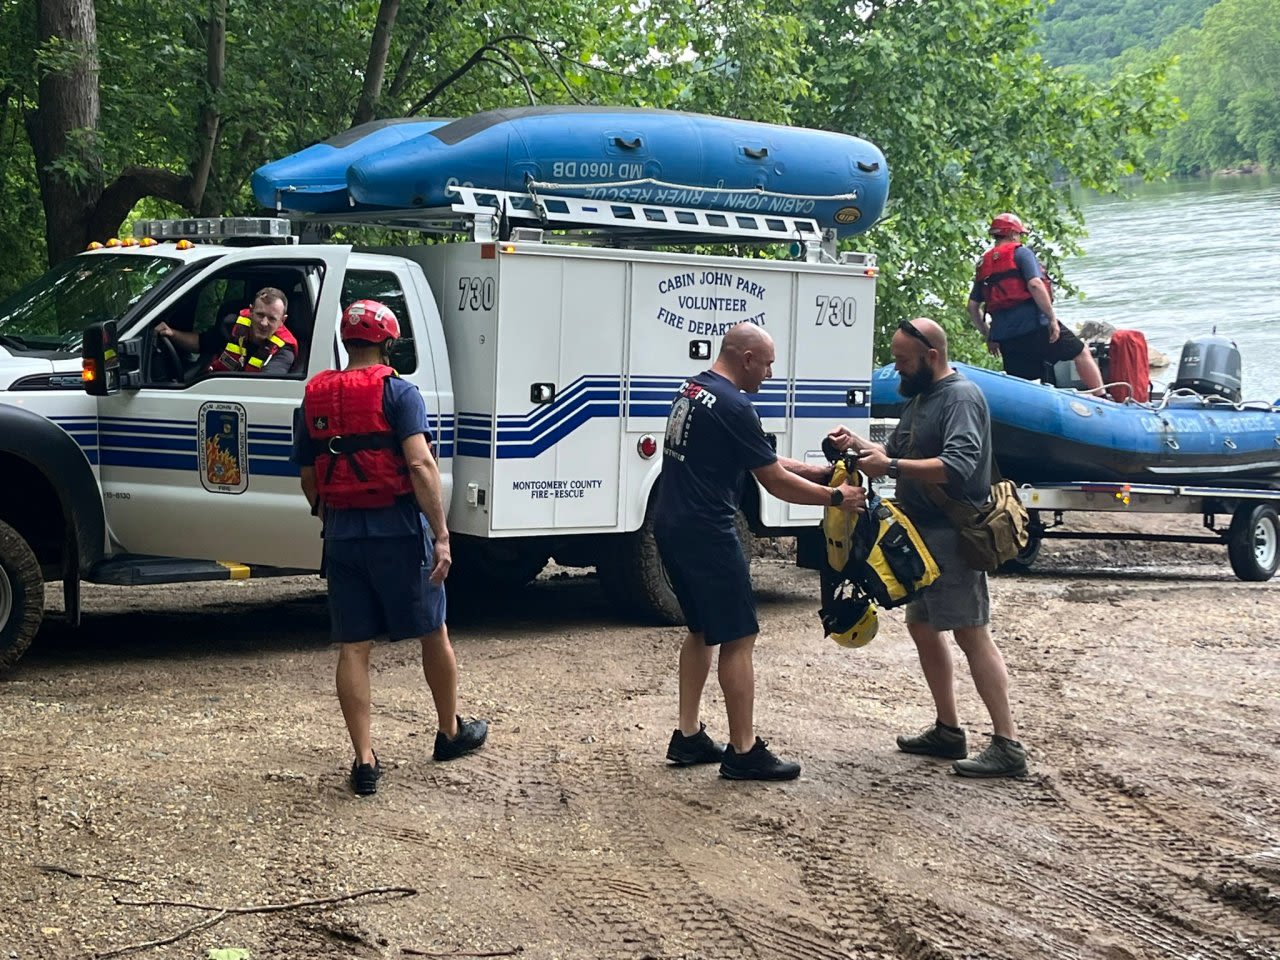 Body found in Potomac River believed to be that of missing swimmer, officials say